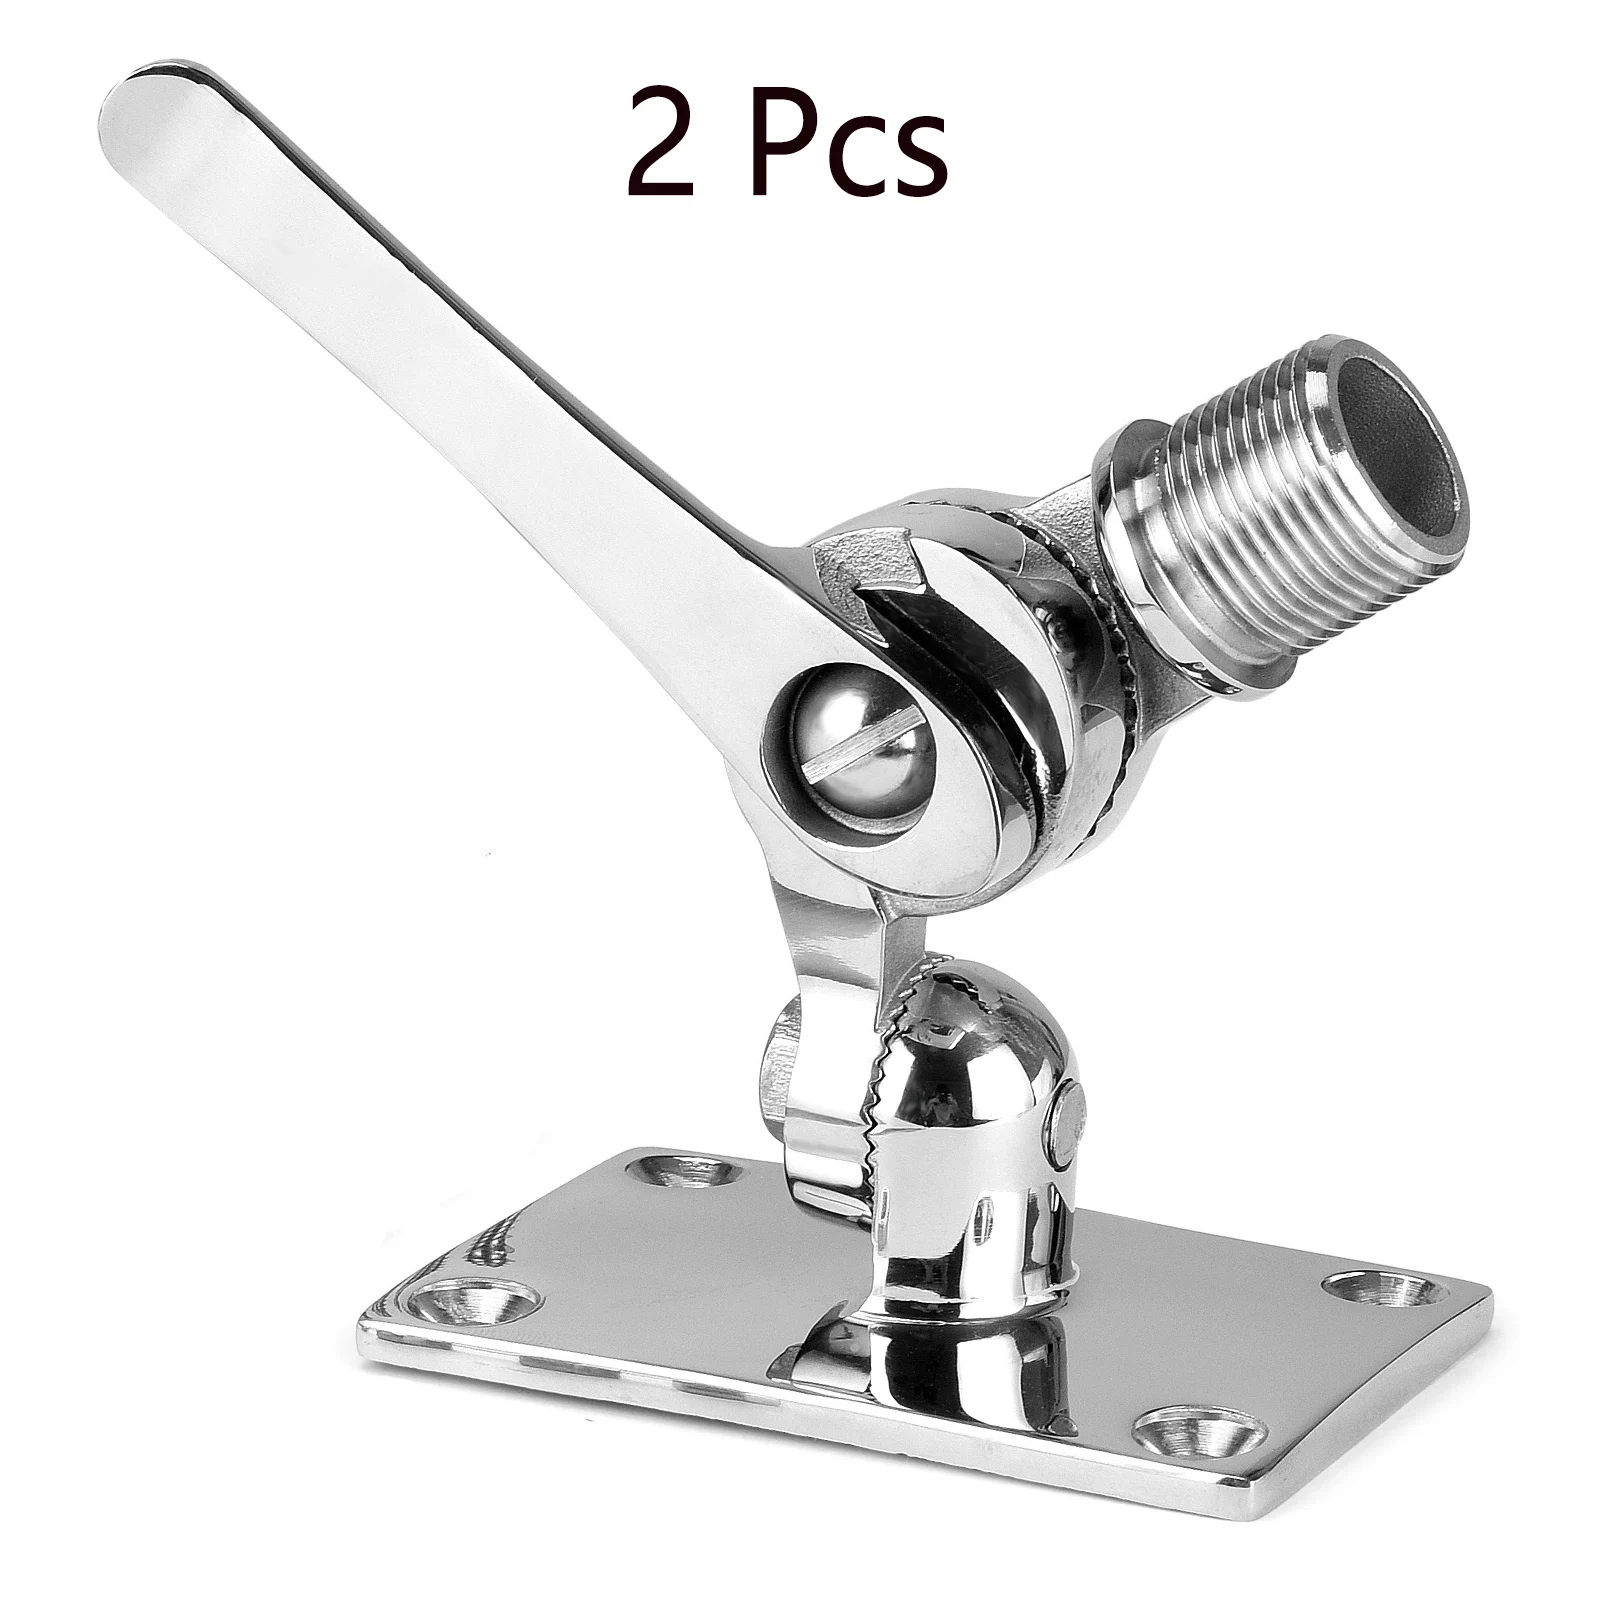 Marine VHF Antenna Mounts,  316 Stainless Steel Adjustable Base VHF Antenna Mount for Boat, Include Installation Screws,2 Pcs 20pcs brusehed 304 stainless steel glass nails side mount stairs glass railing screws nails standoff pin bolt anchor fg790